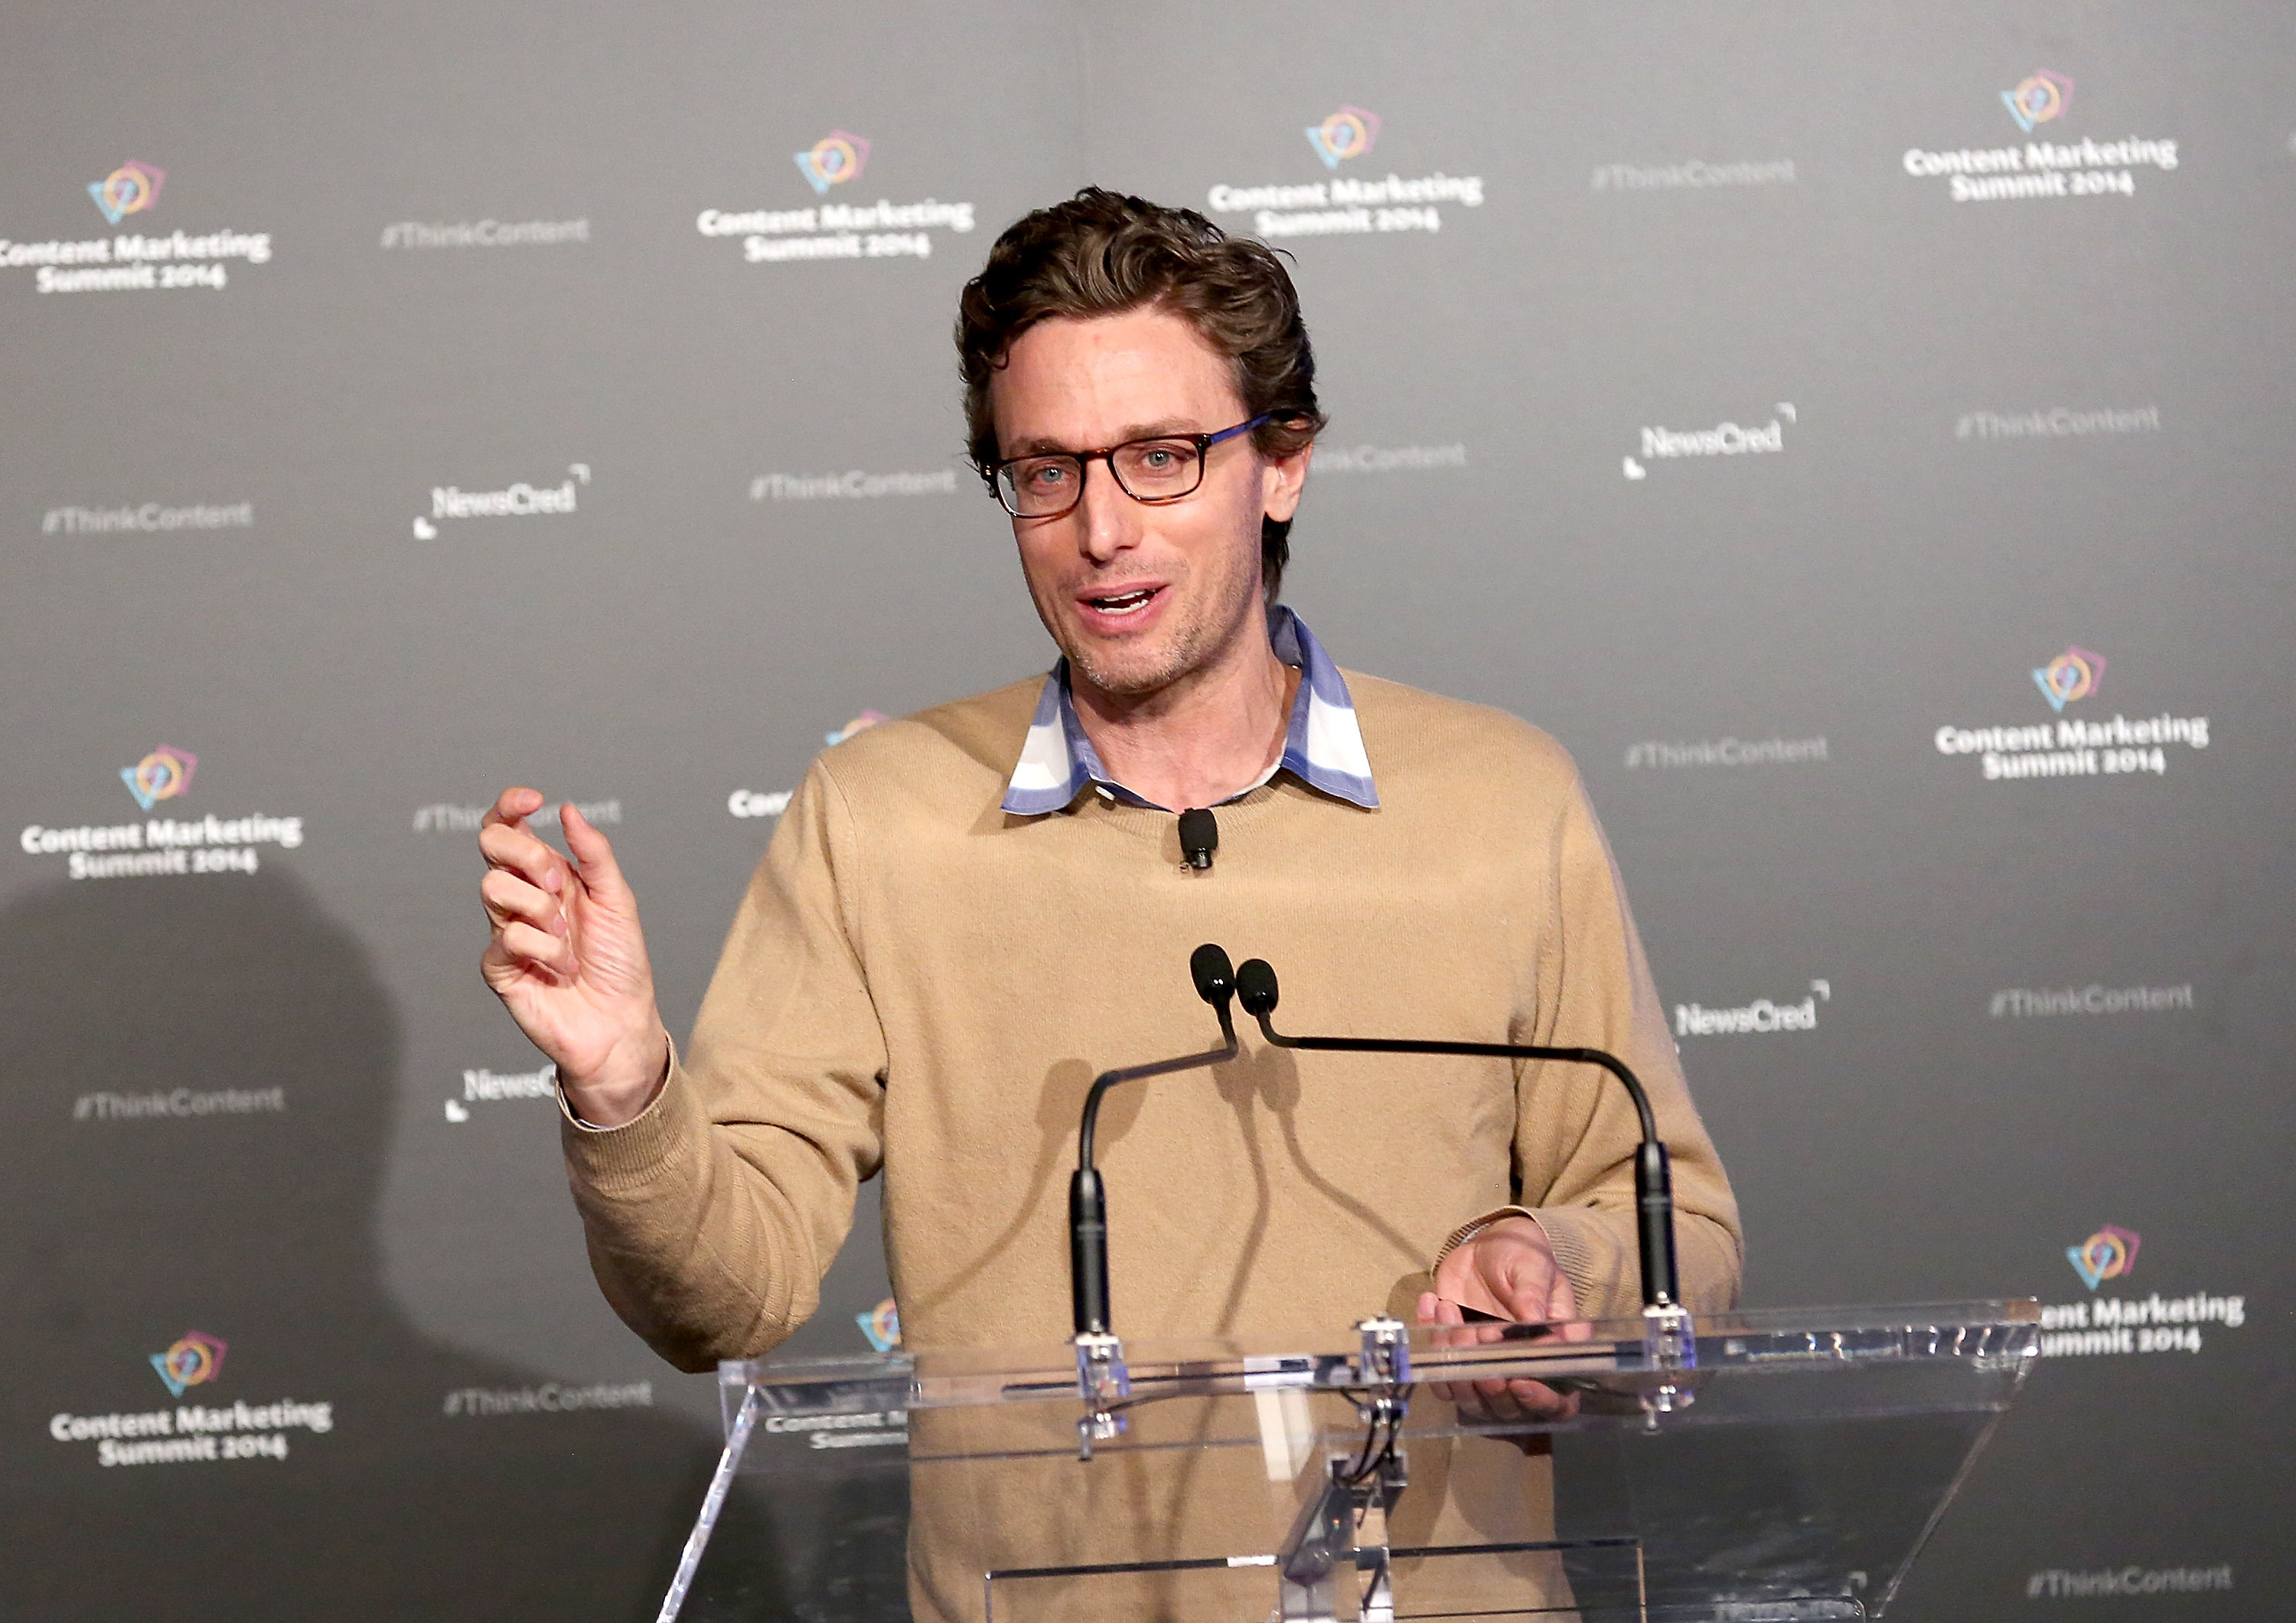 Jonah Peretti, CEO, Buzzfeed speaks at NewsCred's Content Marketing Summit at Metropolitan Pavilion on September 18, 2014 in New York City.